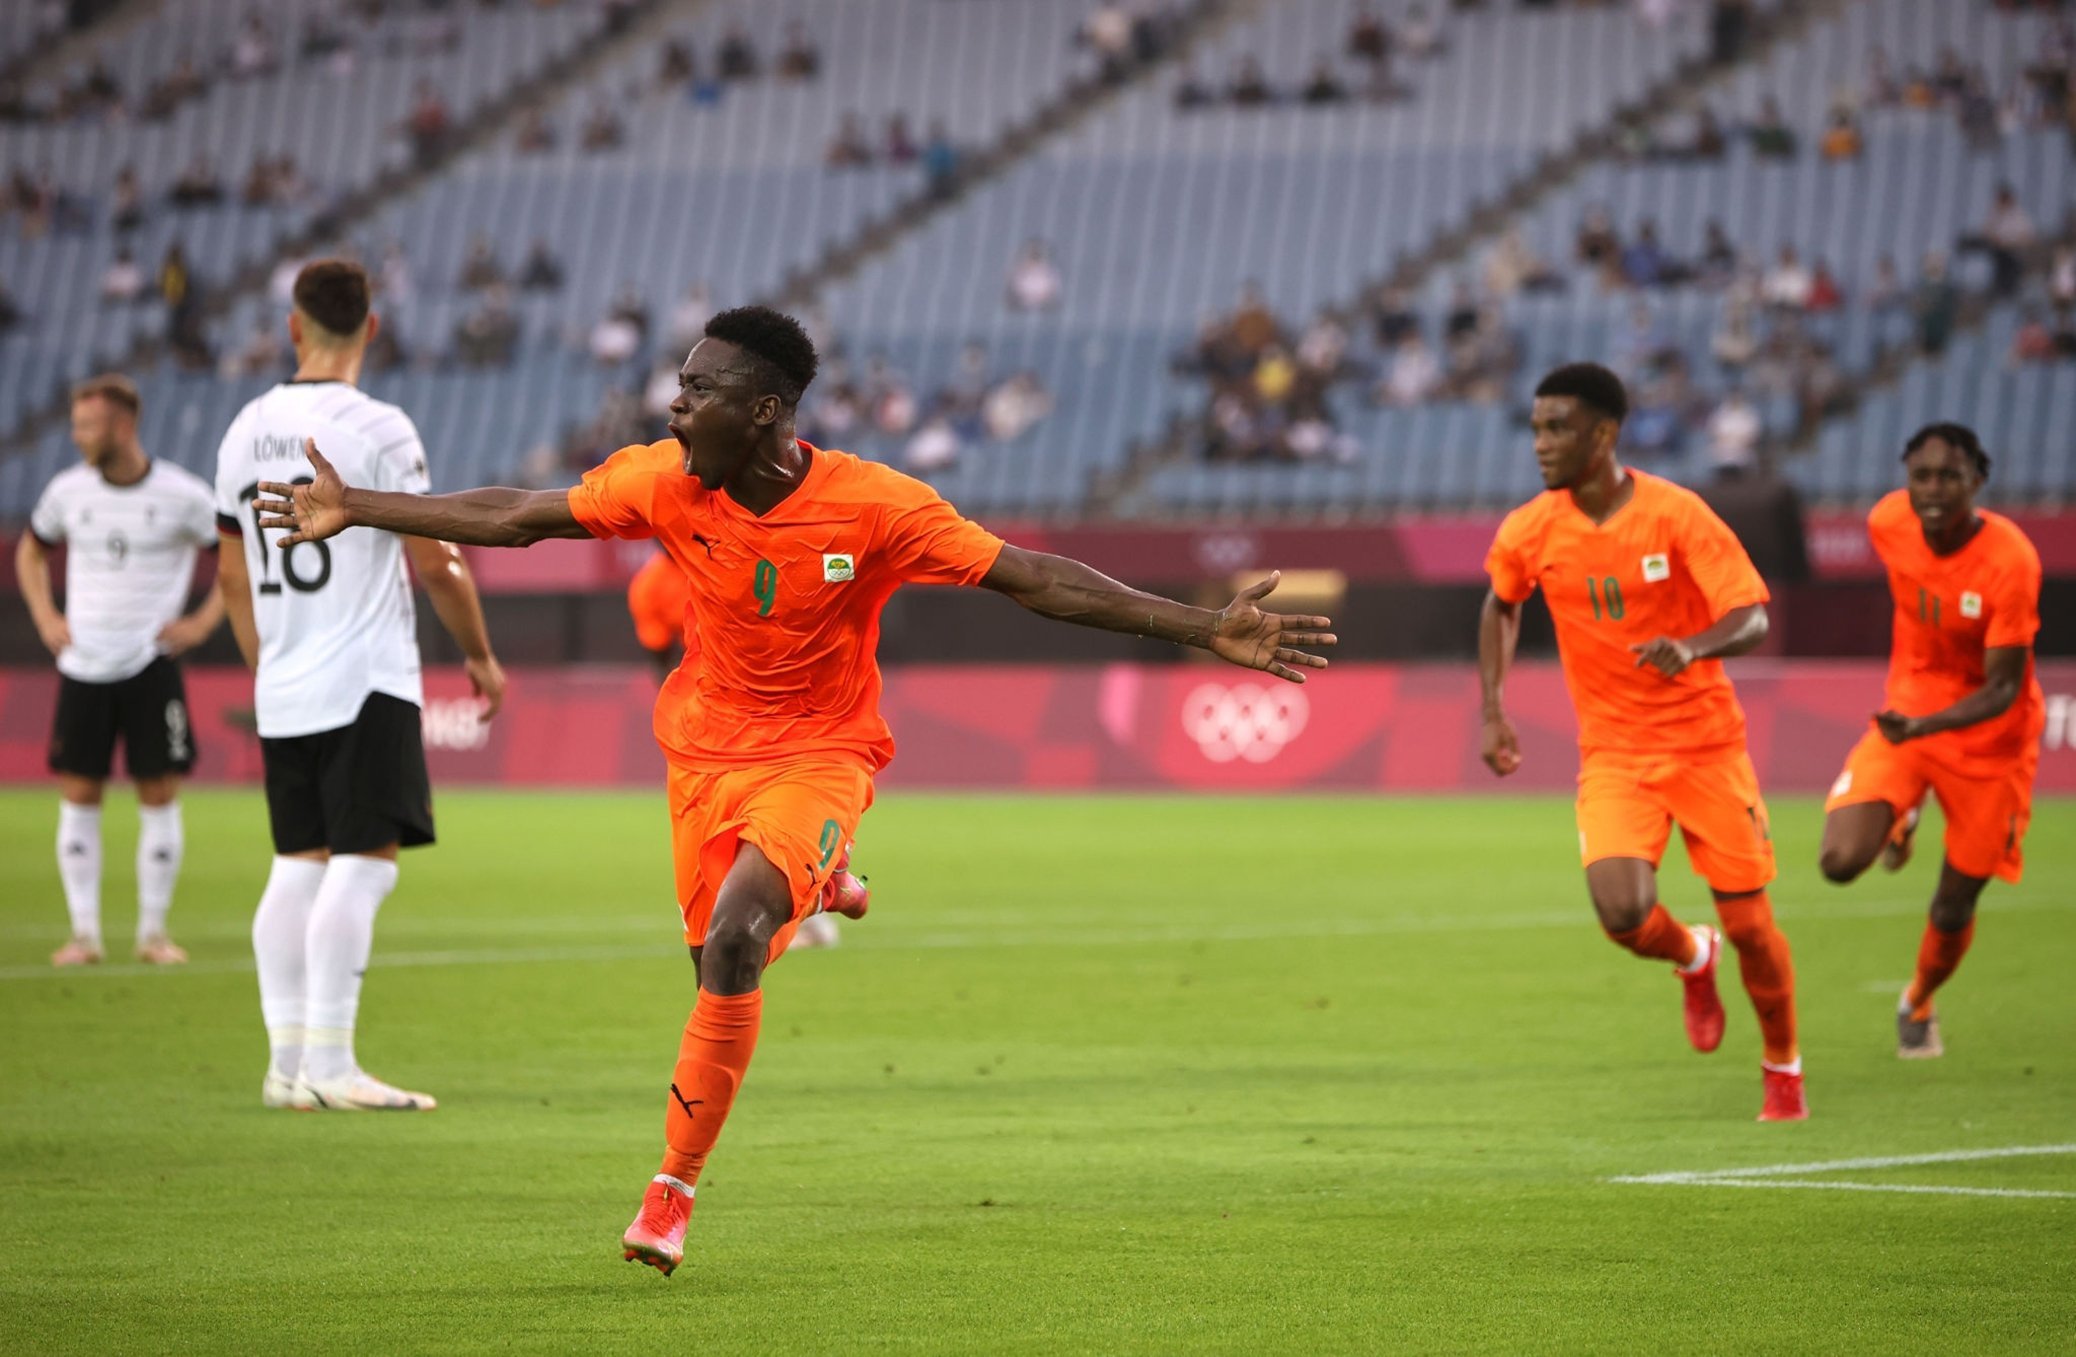 Olympics football: Ivory Coast through to quarters after Germany draw